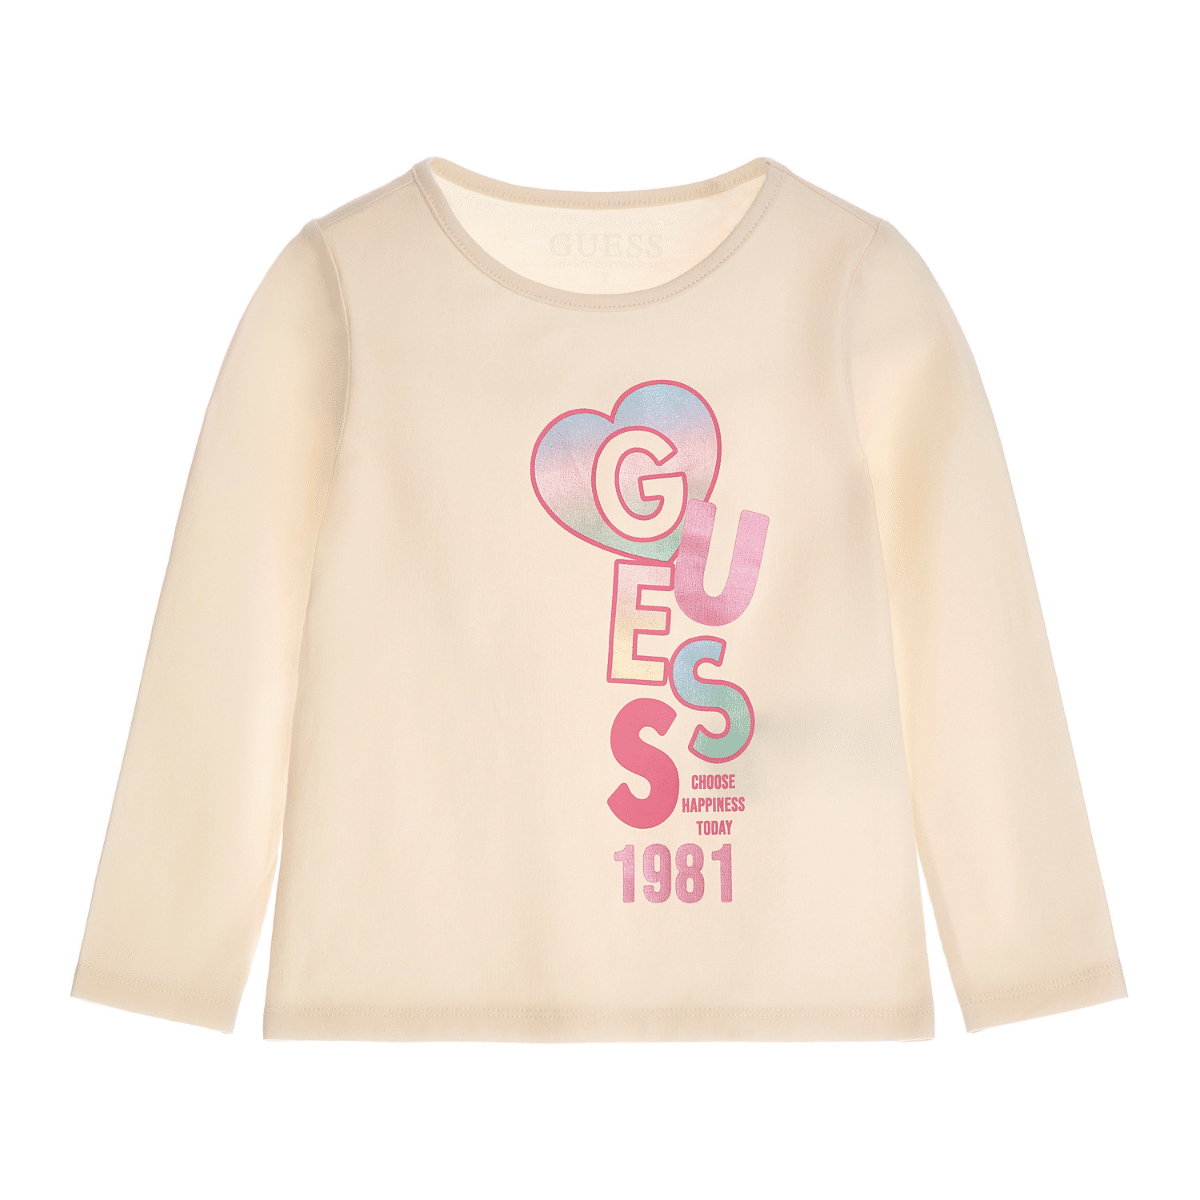 Guess girls long sleeved cream top with pastels logo